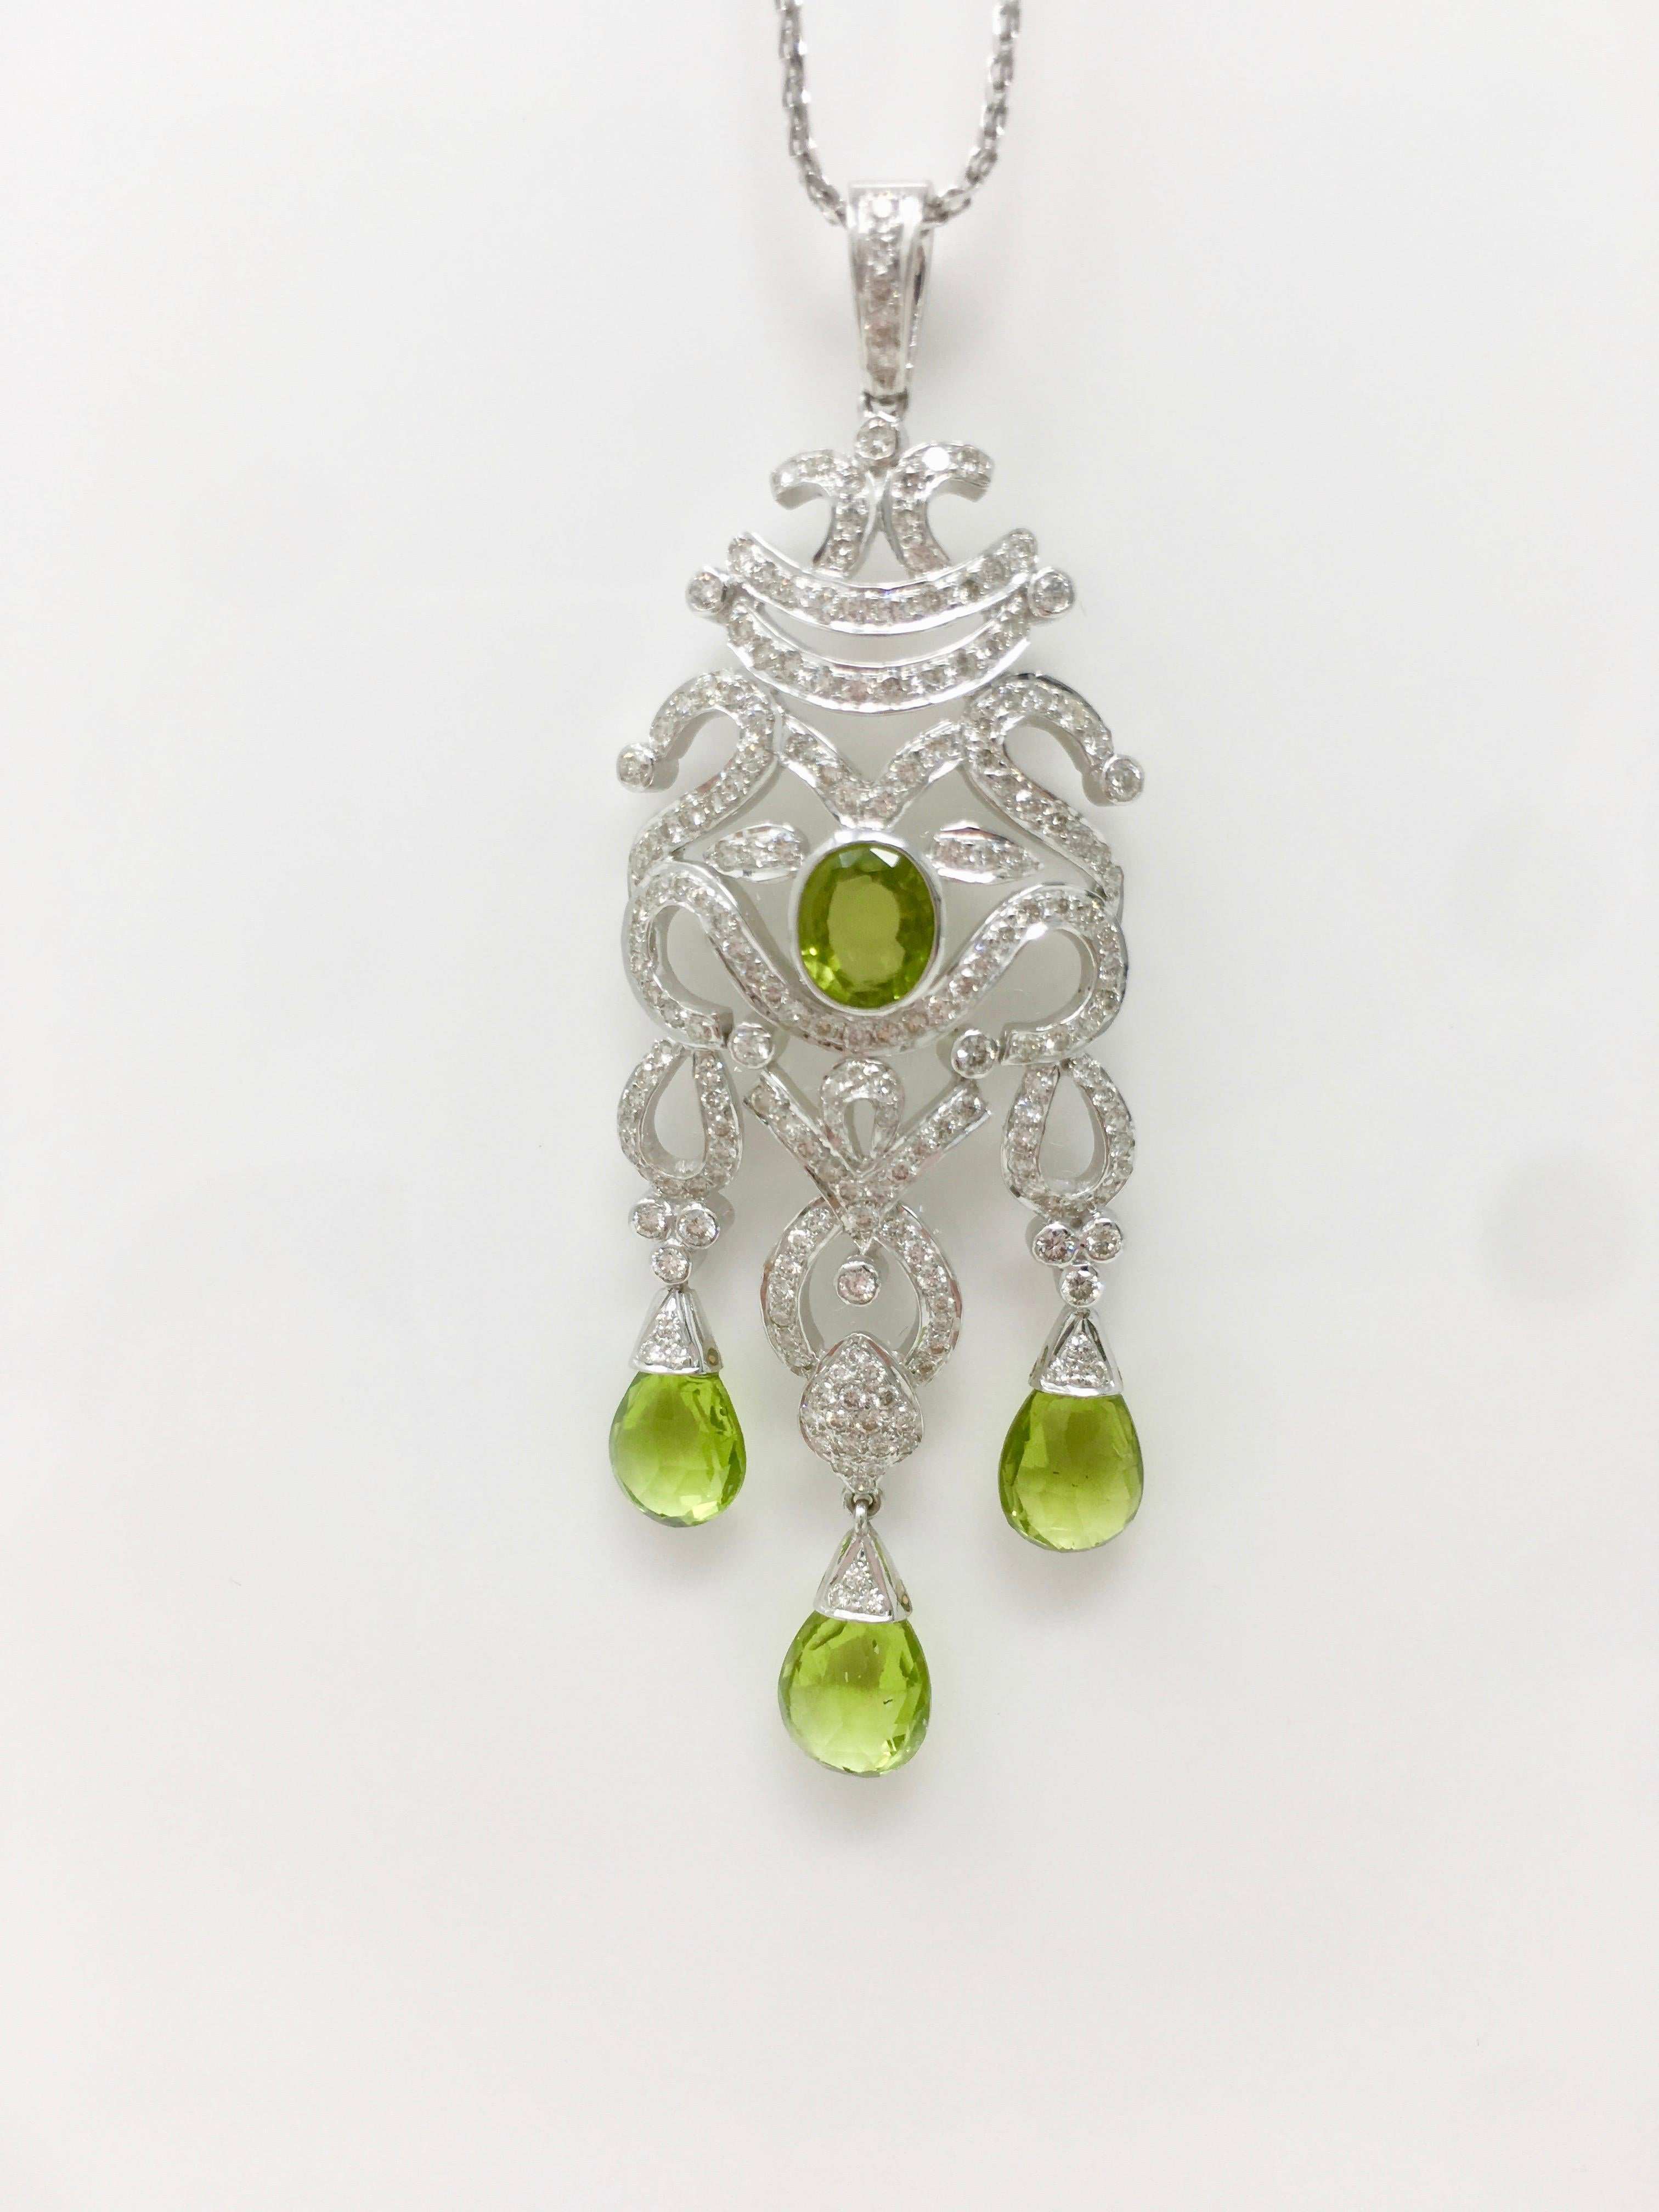 This unique elegant creation by Moguldiam Inc features a beautifully custom handmade pair of earrings  and a gorgeous pendant weighing 3.67 carat  white round brilliant diamonds with GH color VS clarity and 17.45 carat green peridot. The measurement